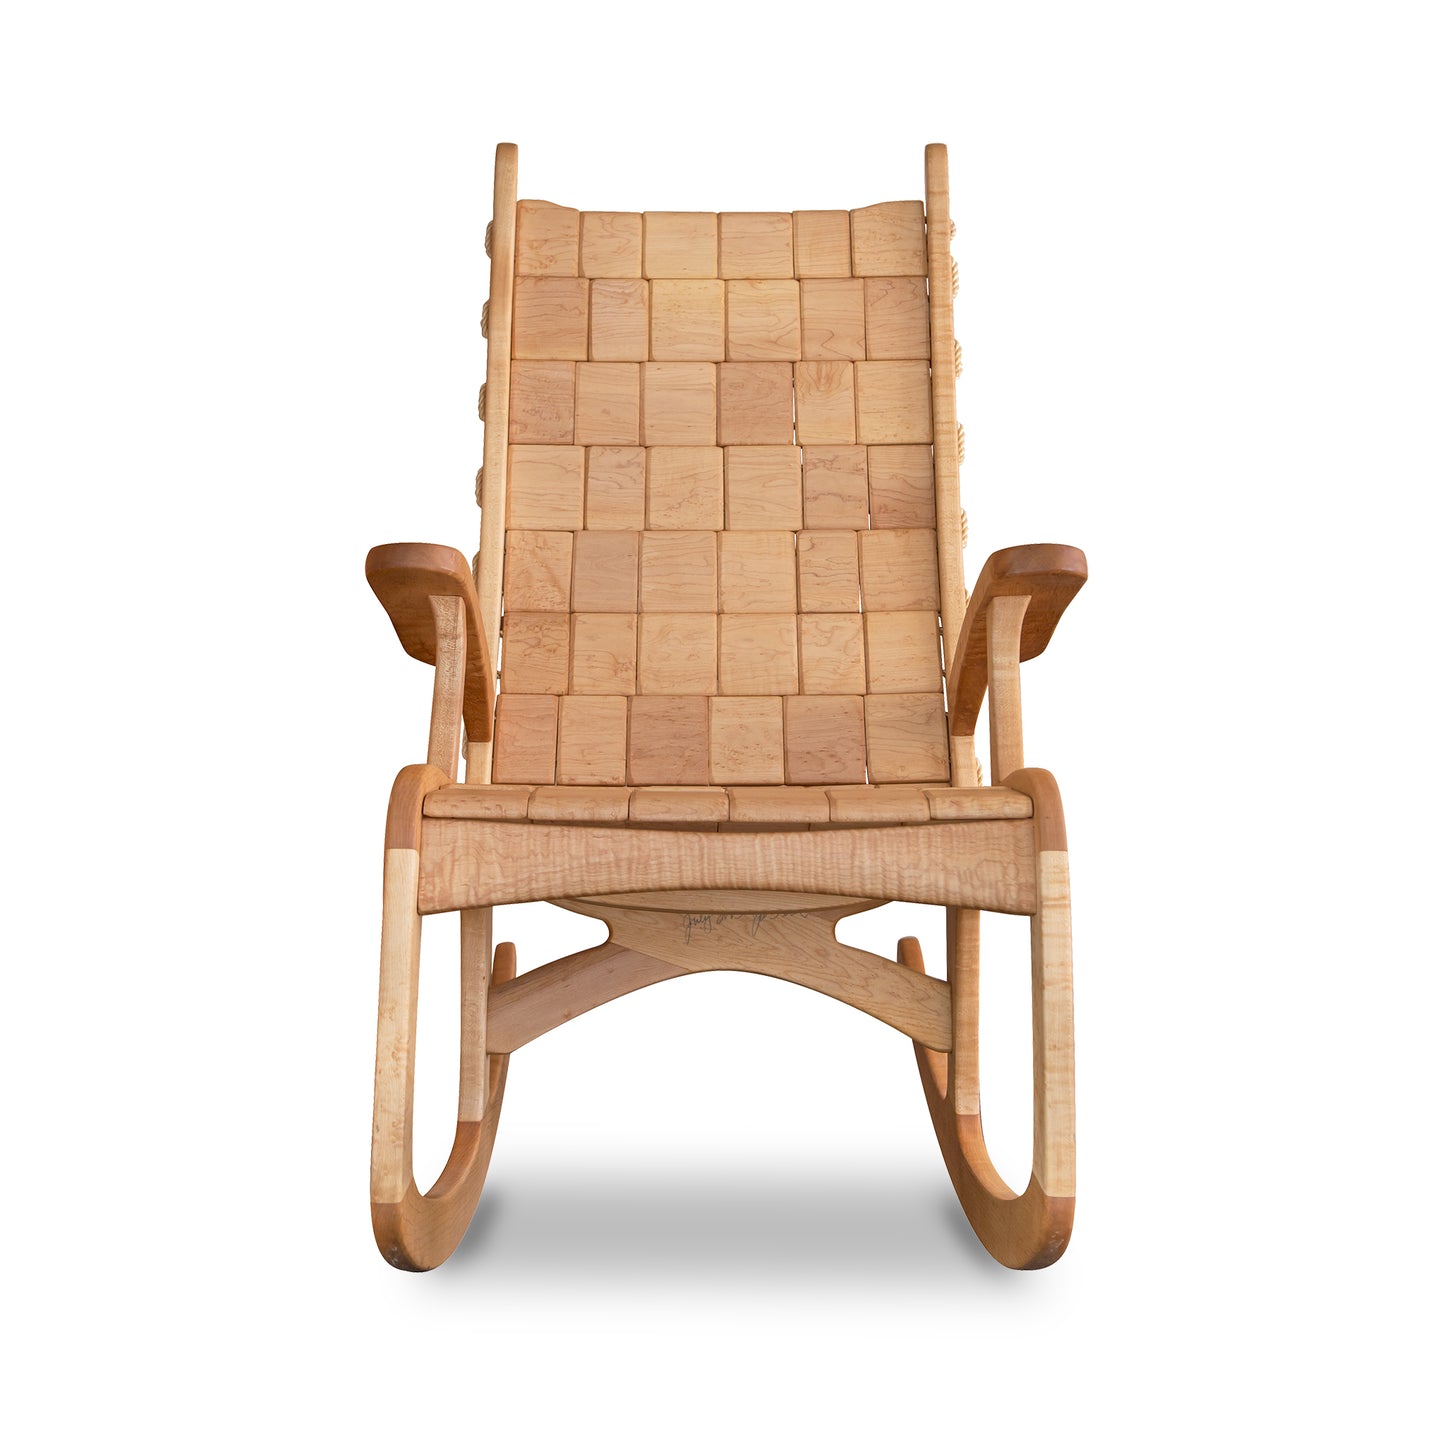 A wooden rocking chair with a woven seat.